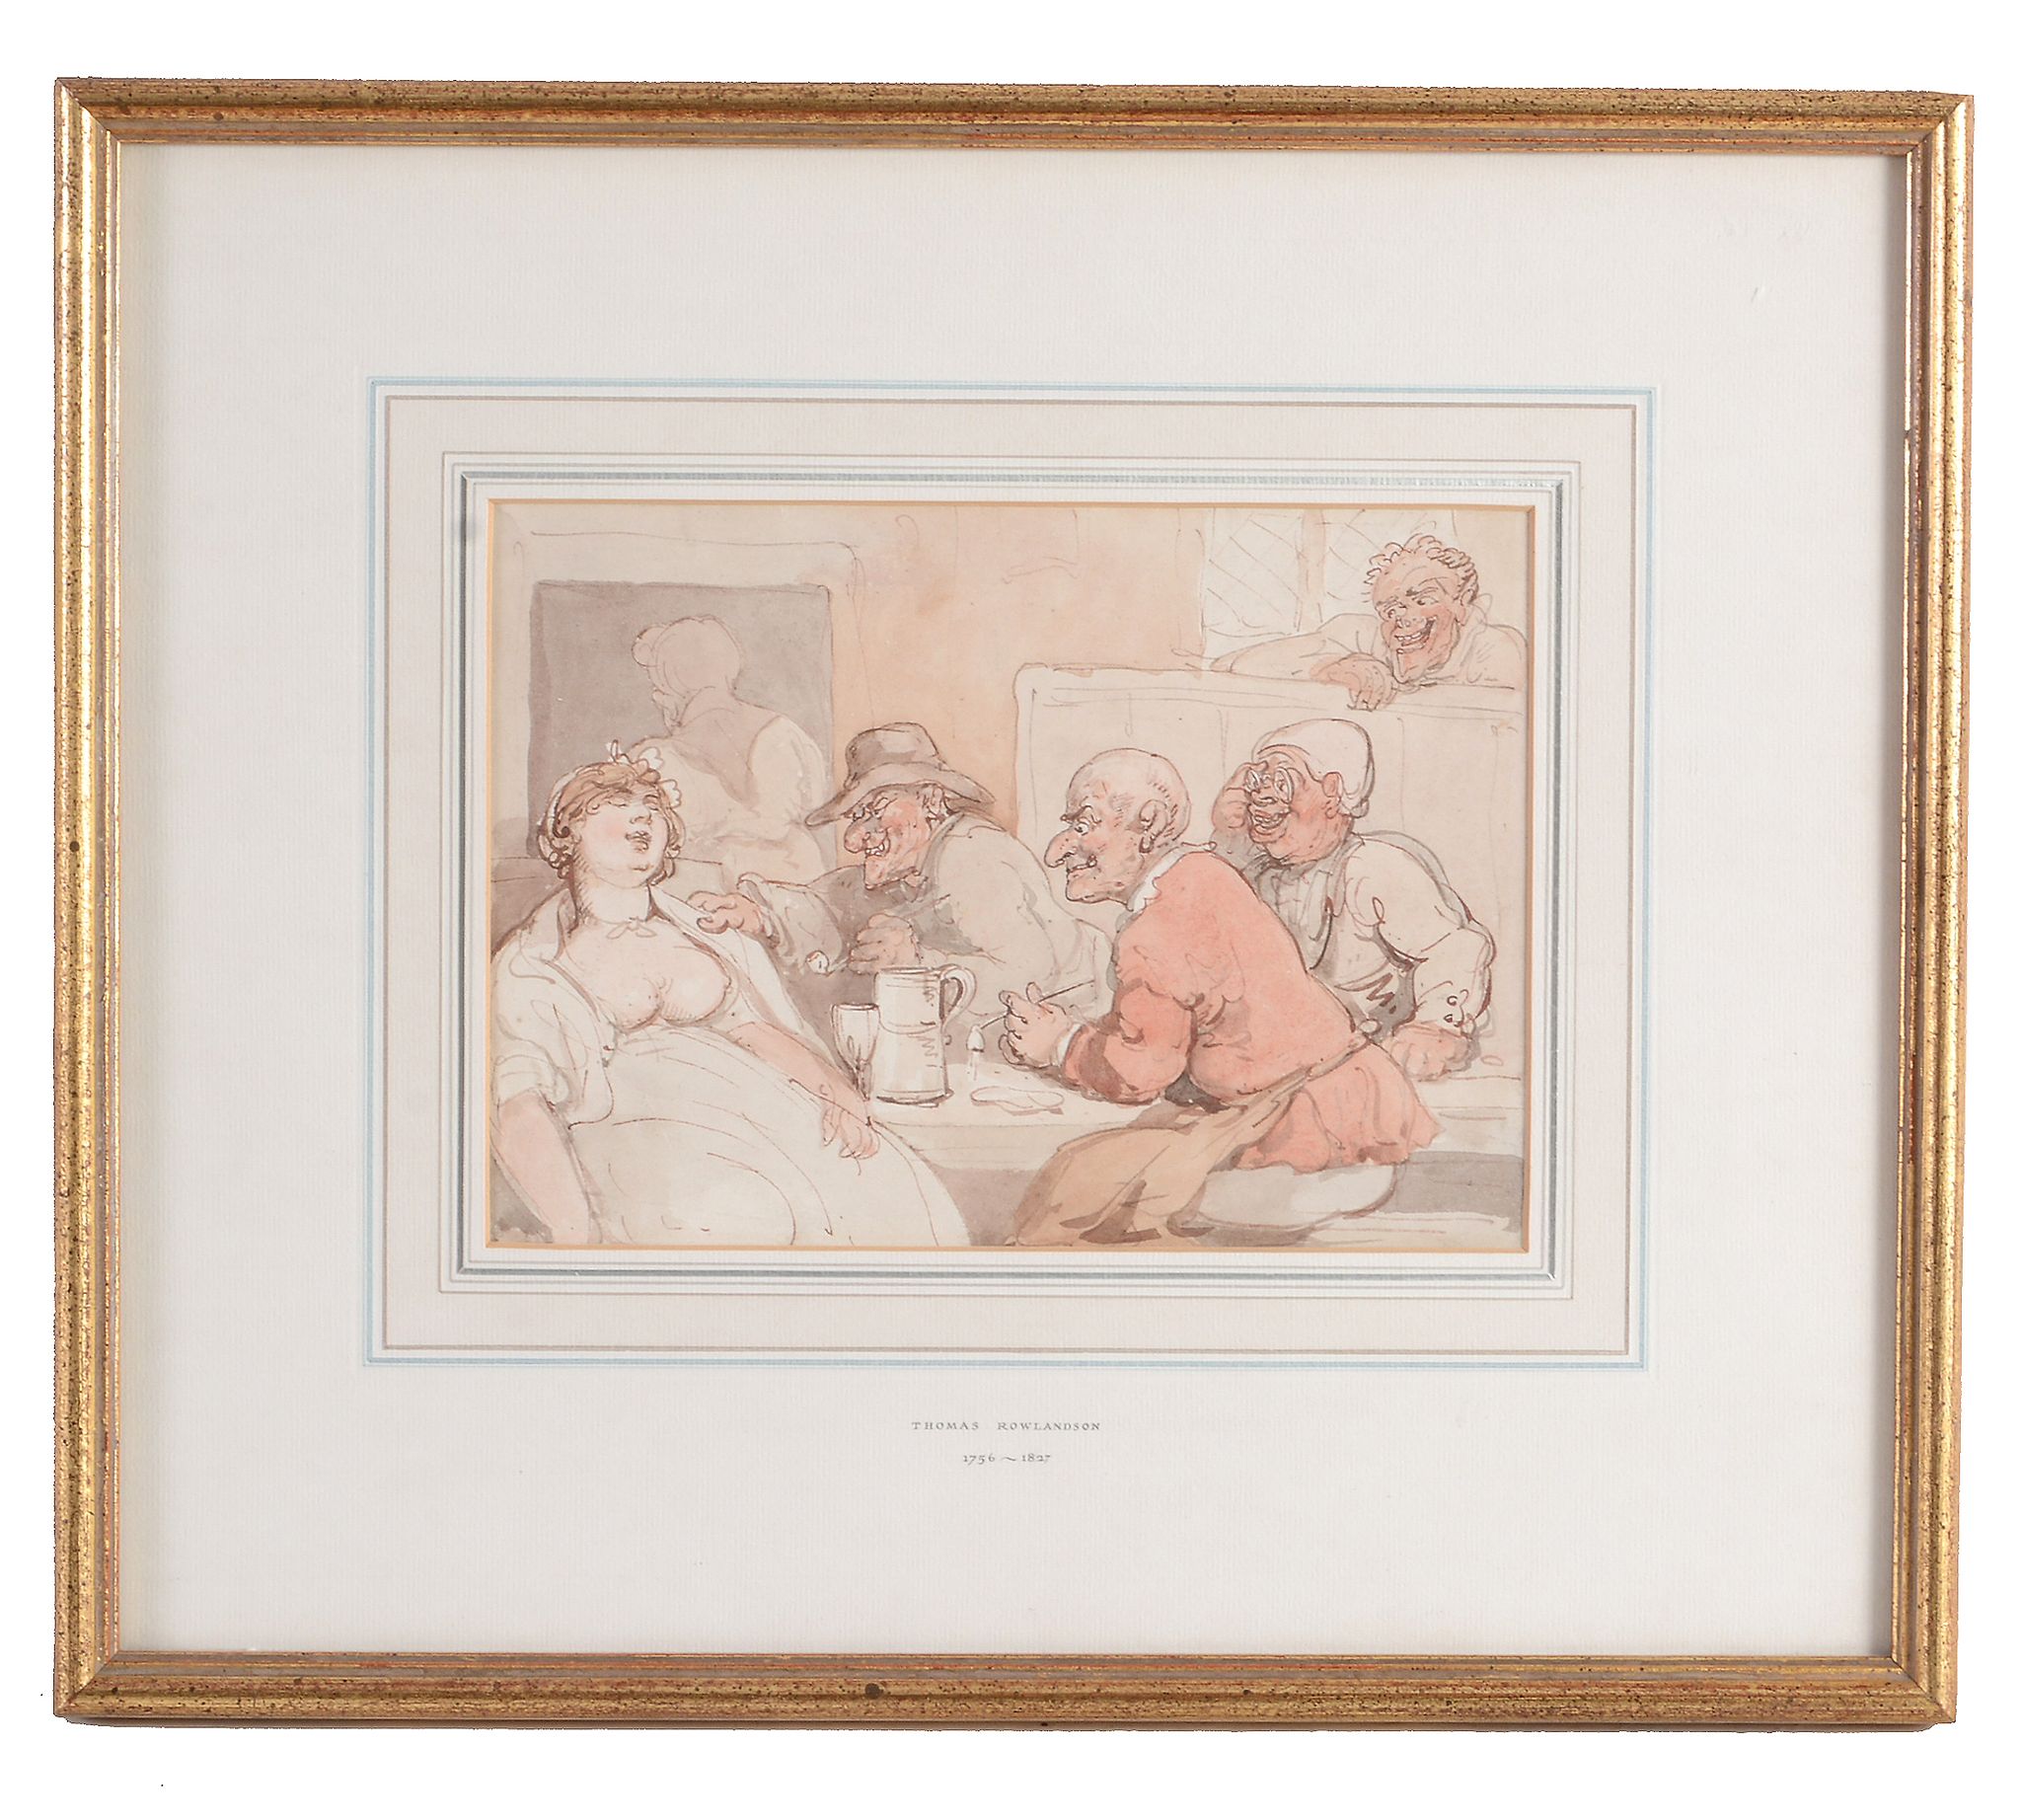 Thomas Rowlandson (1756-1827) - Tavern scene with men gawping at an exposed women Pen and grey-brown - Image 2 of 2